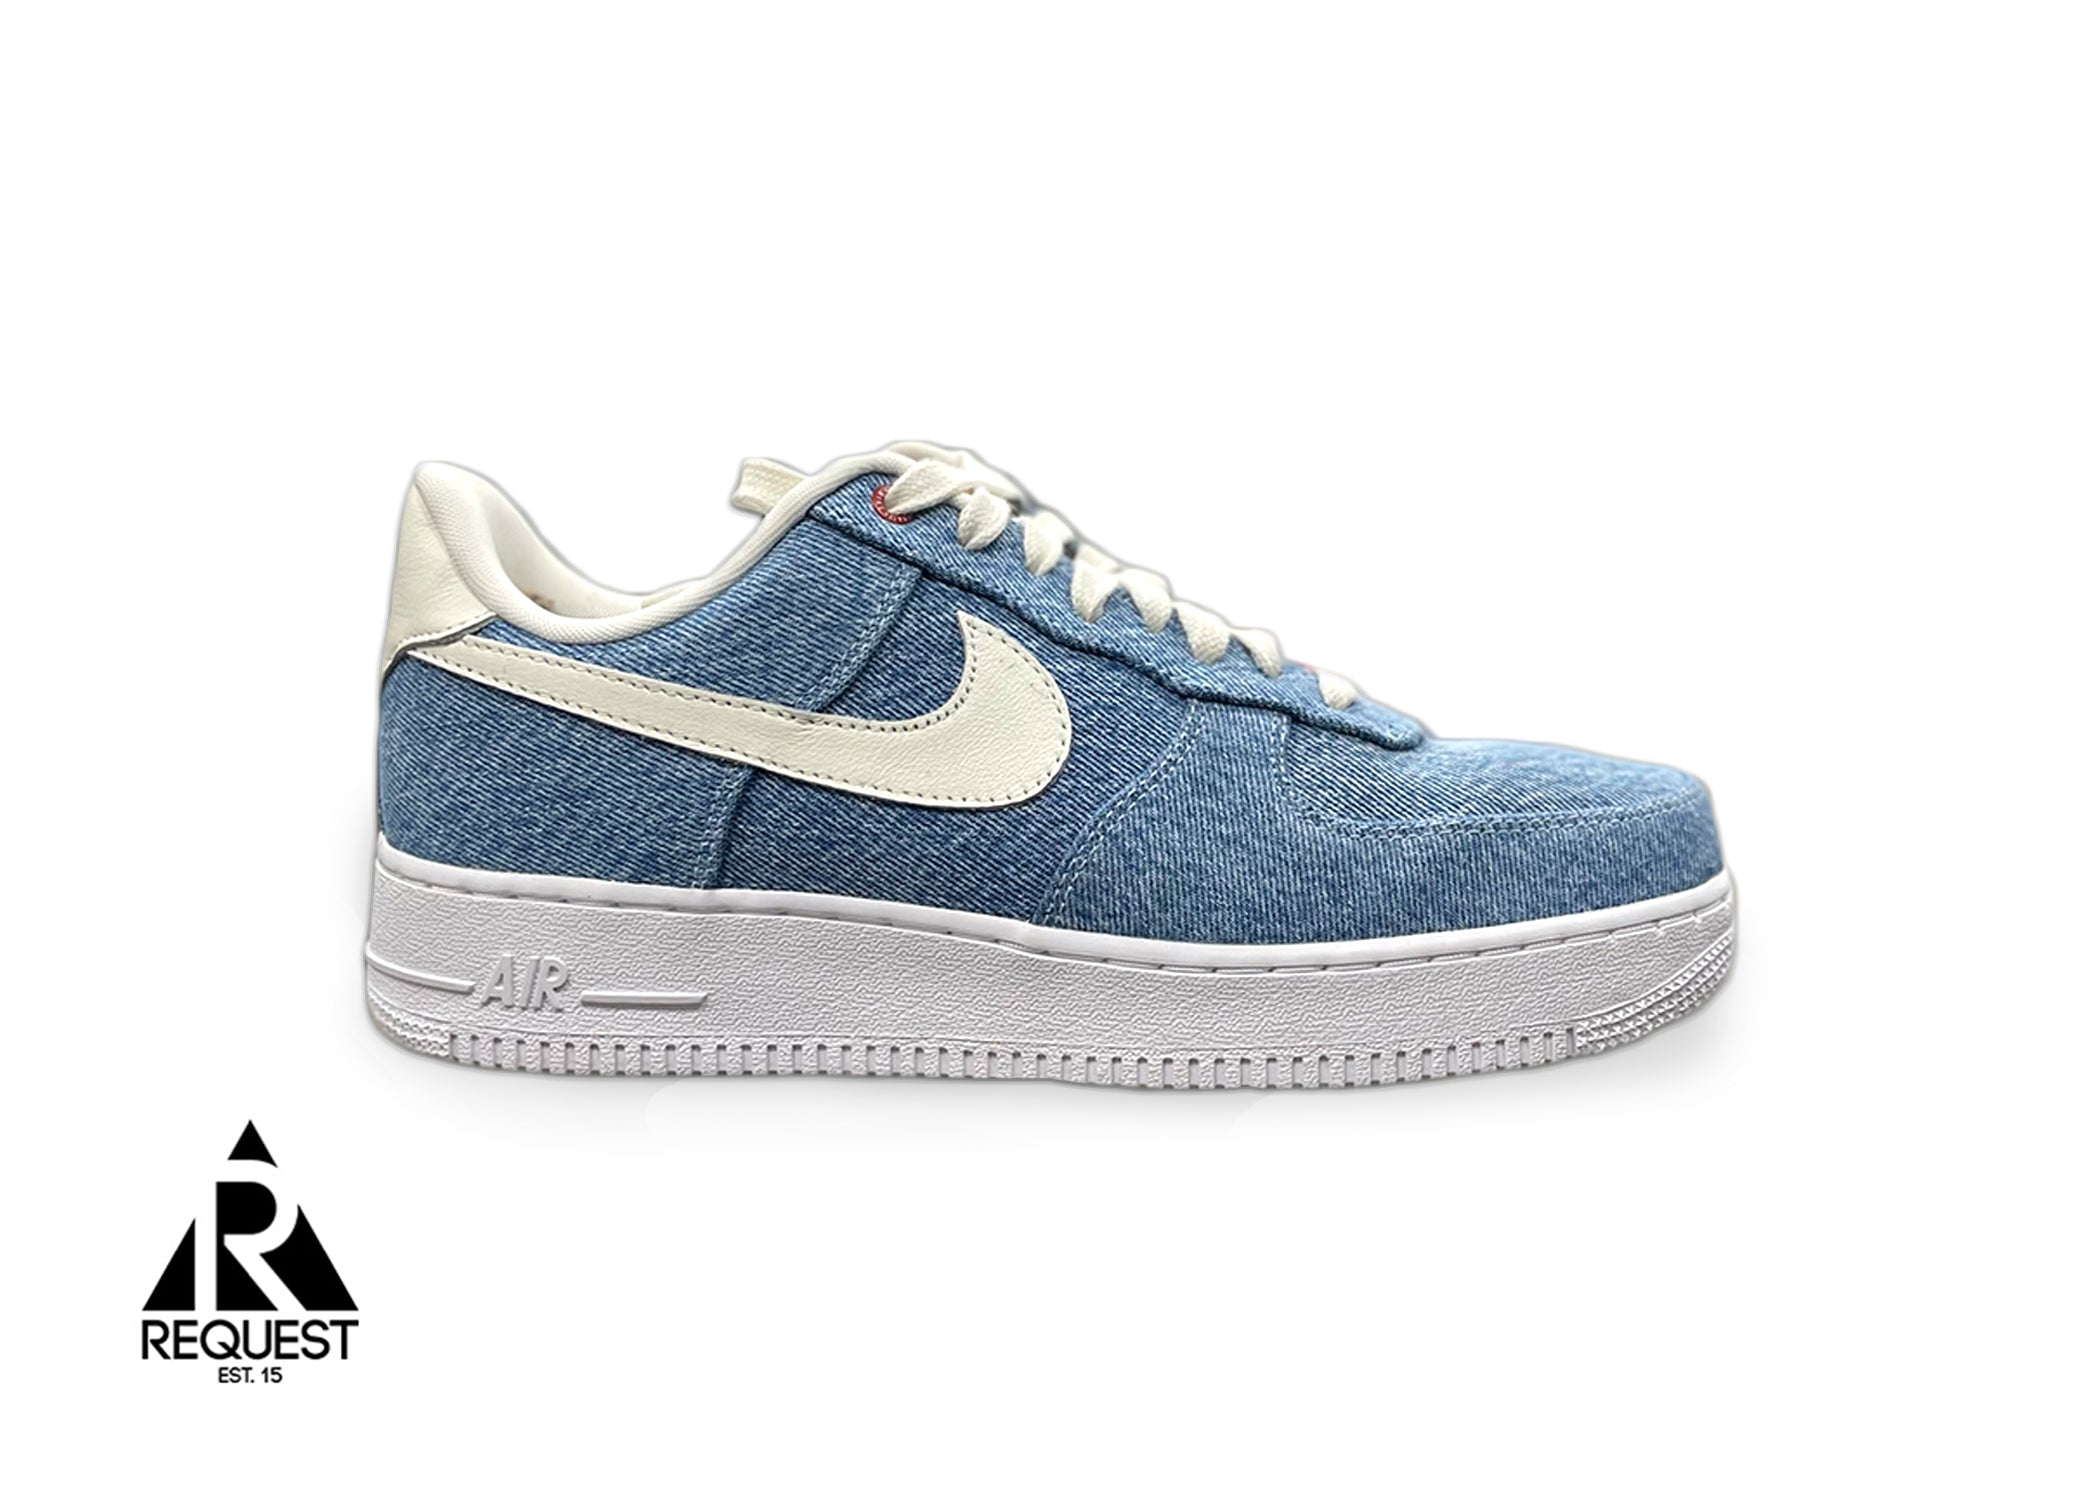 Nike Air Force 1 "By You Levi"